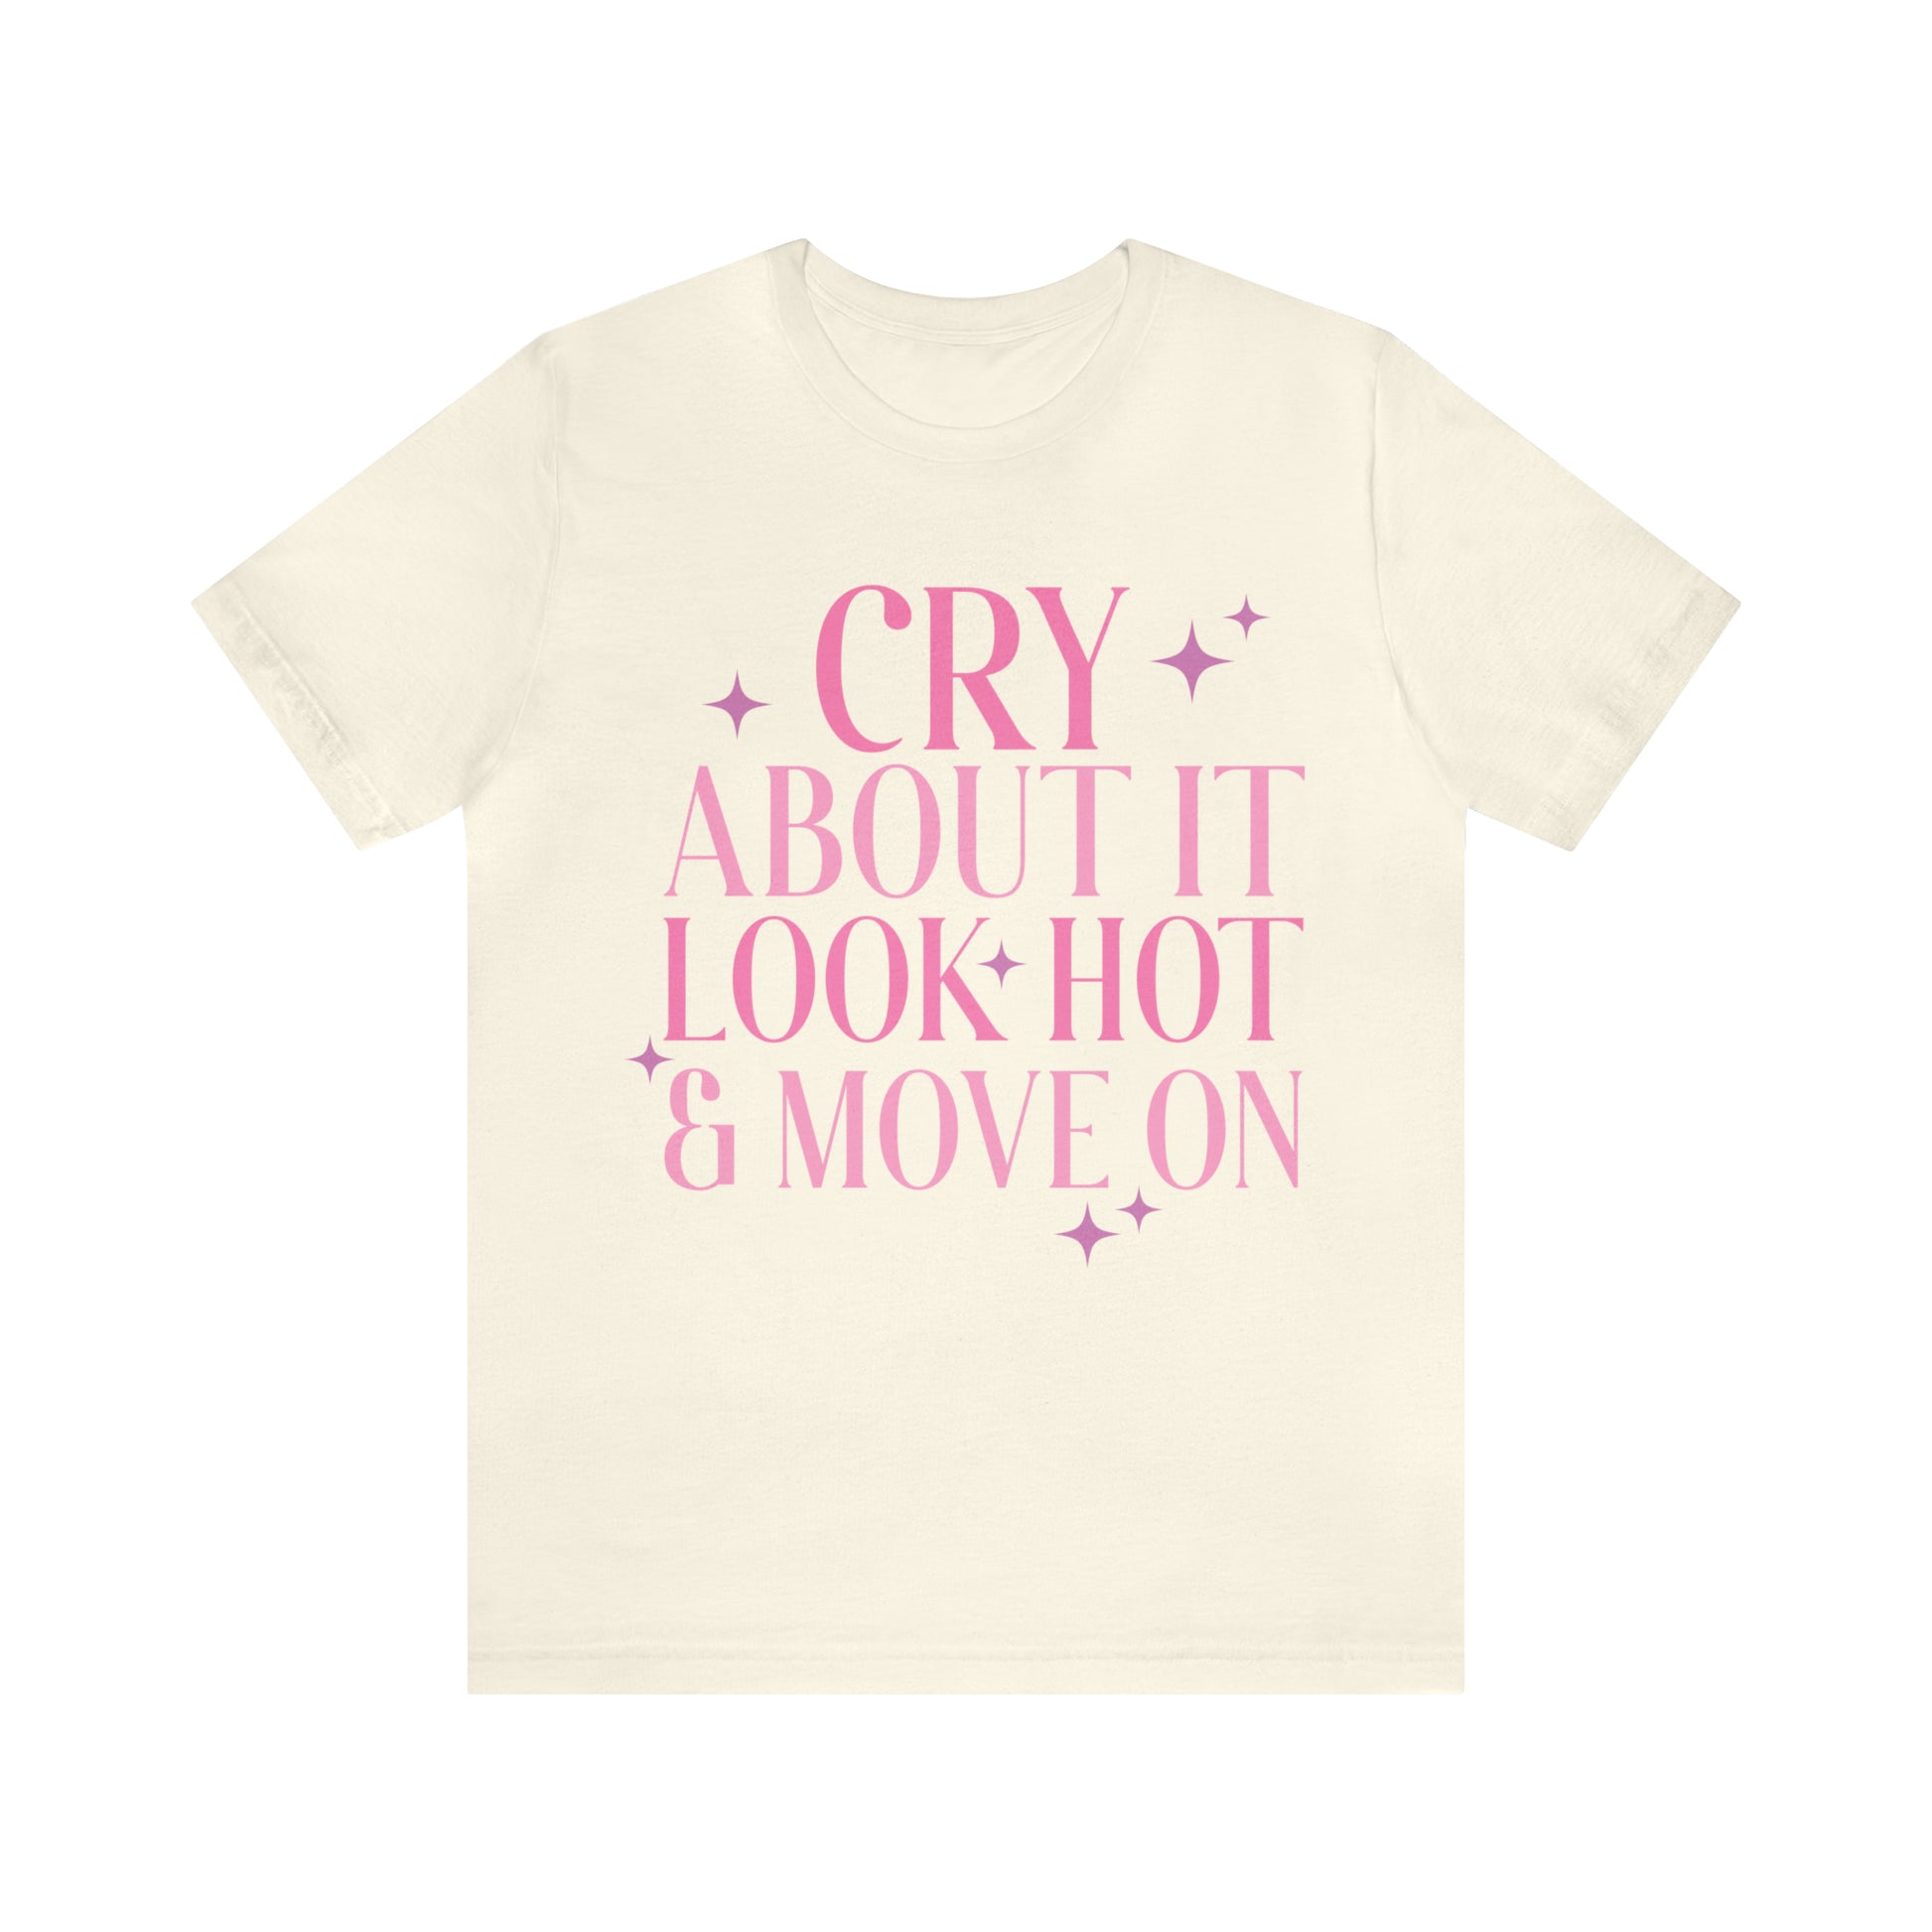 Cry About It, Look Hot, Move ON, Funny Sarcastic Shirt for Girls